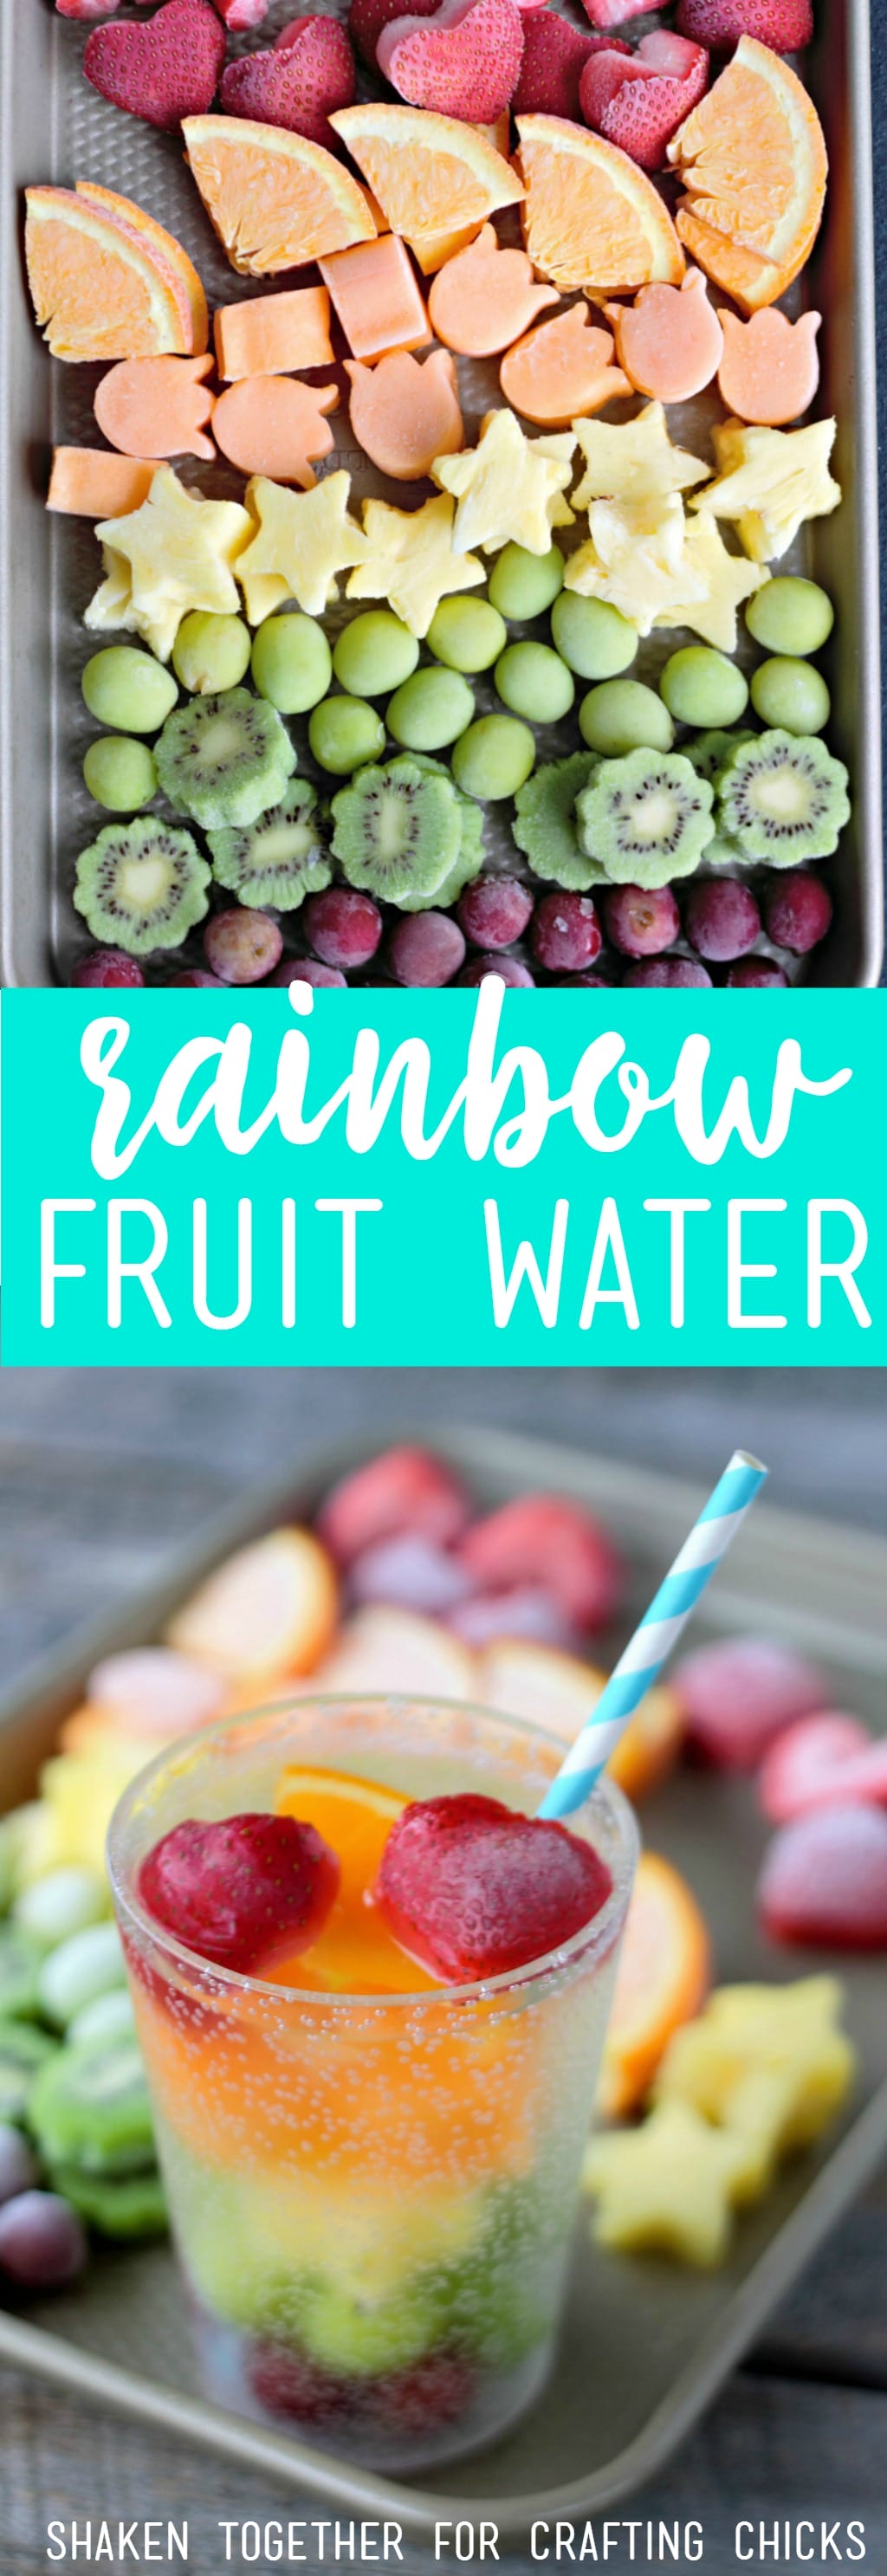 Refreshing Rainbow Fruit Water with Frozen Fruit is a healthy and delicious way to stay hydrated all Summer long! As the fruit thaws, it flavors the water and provides a snack to nibble on!